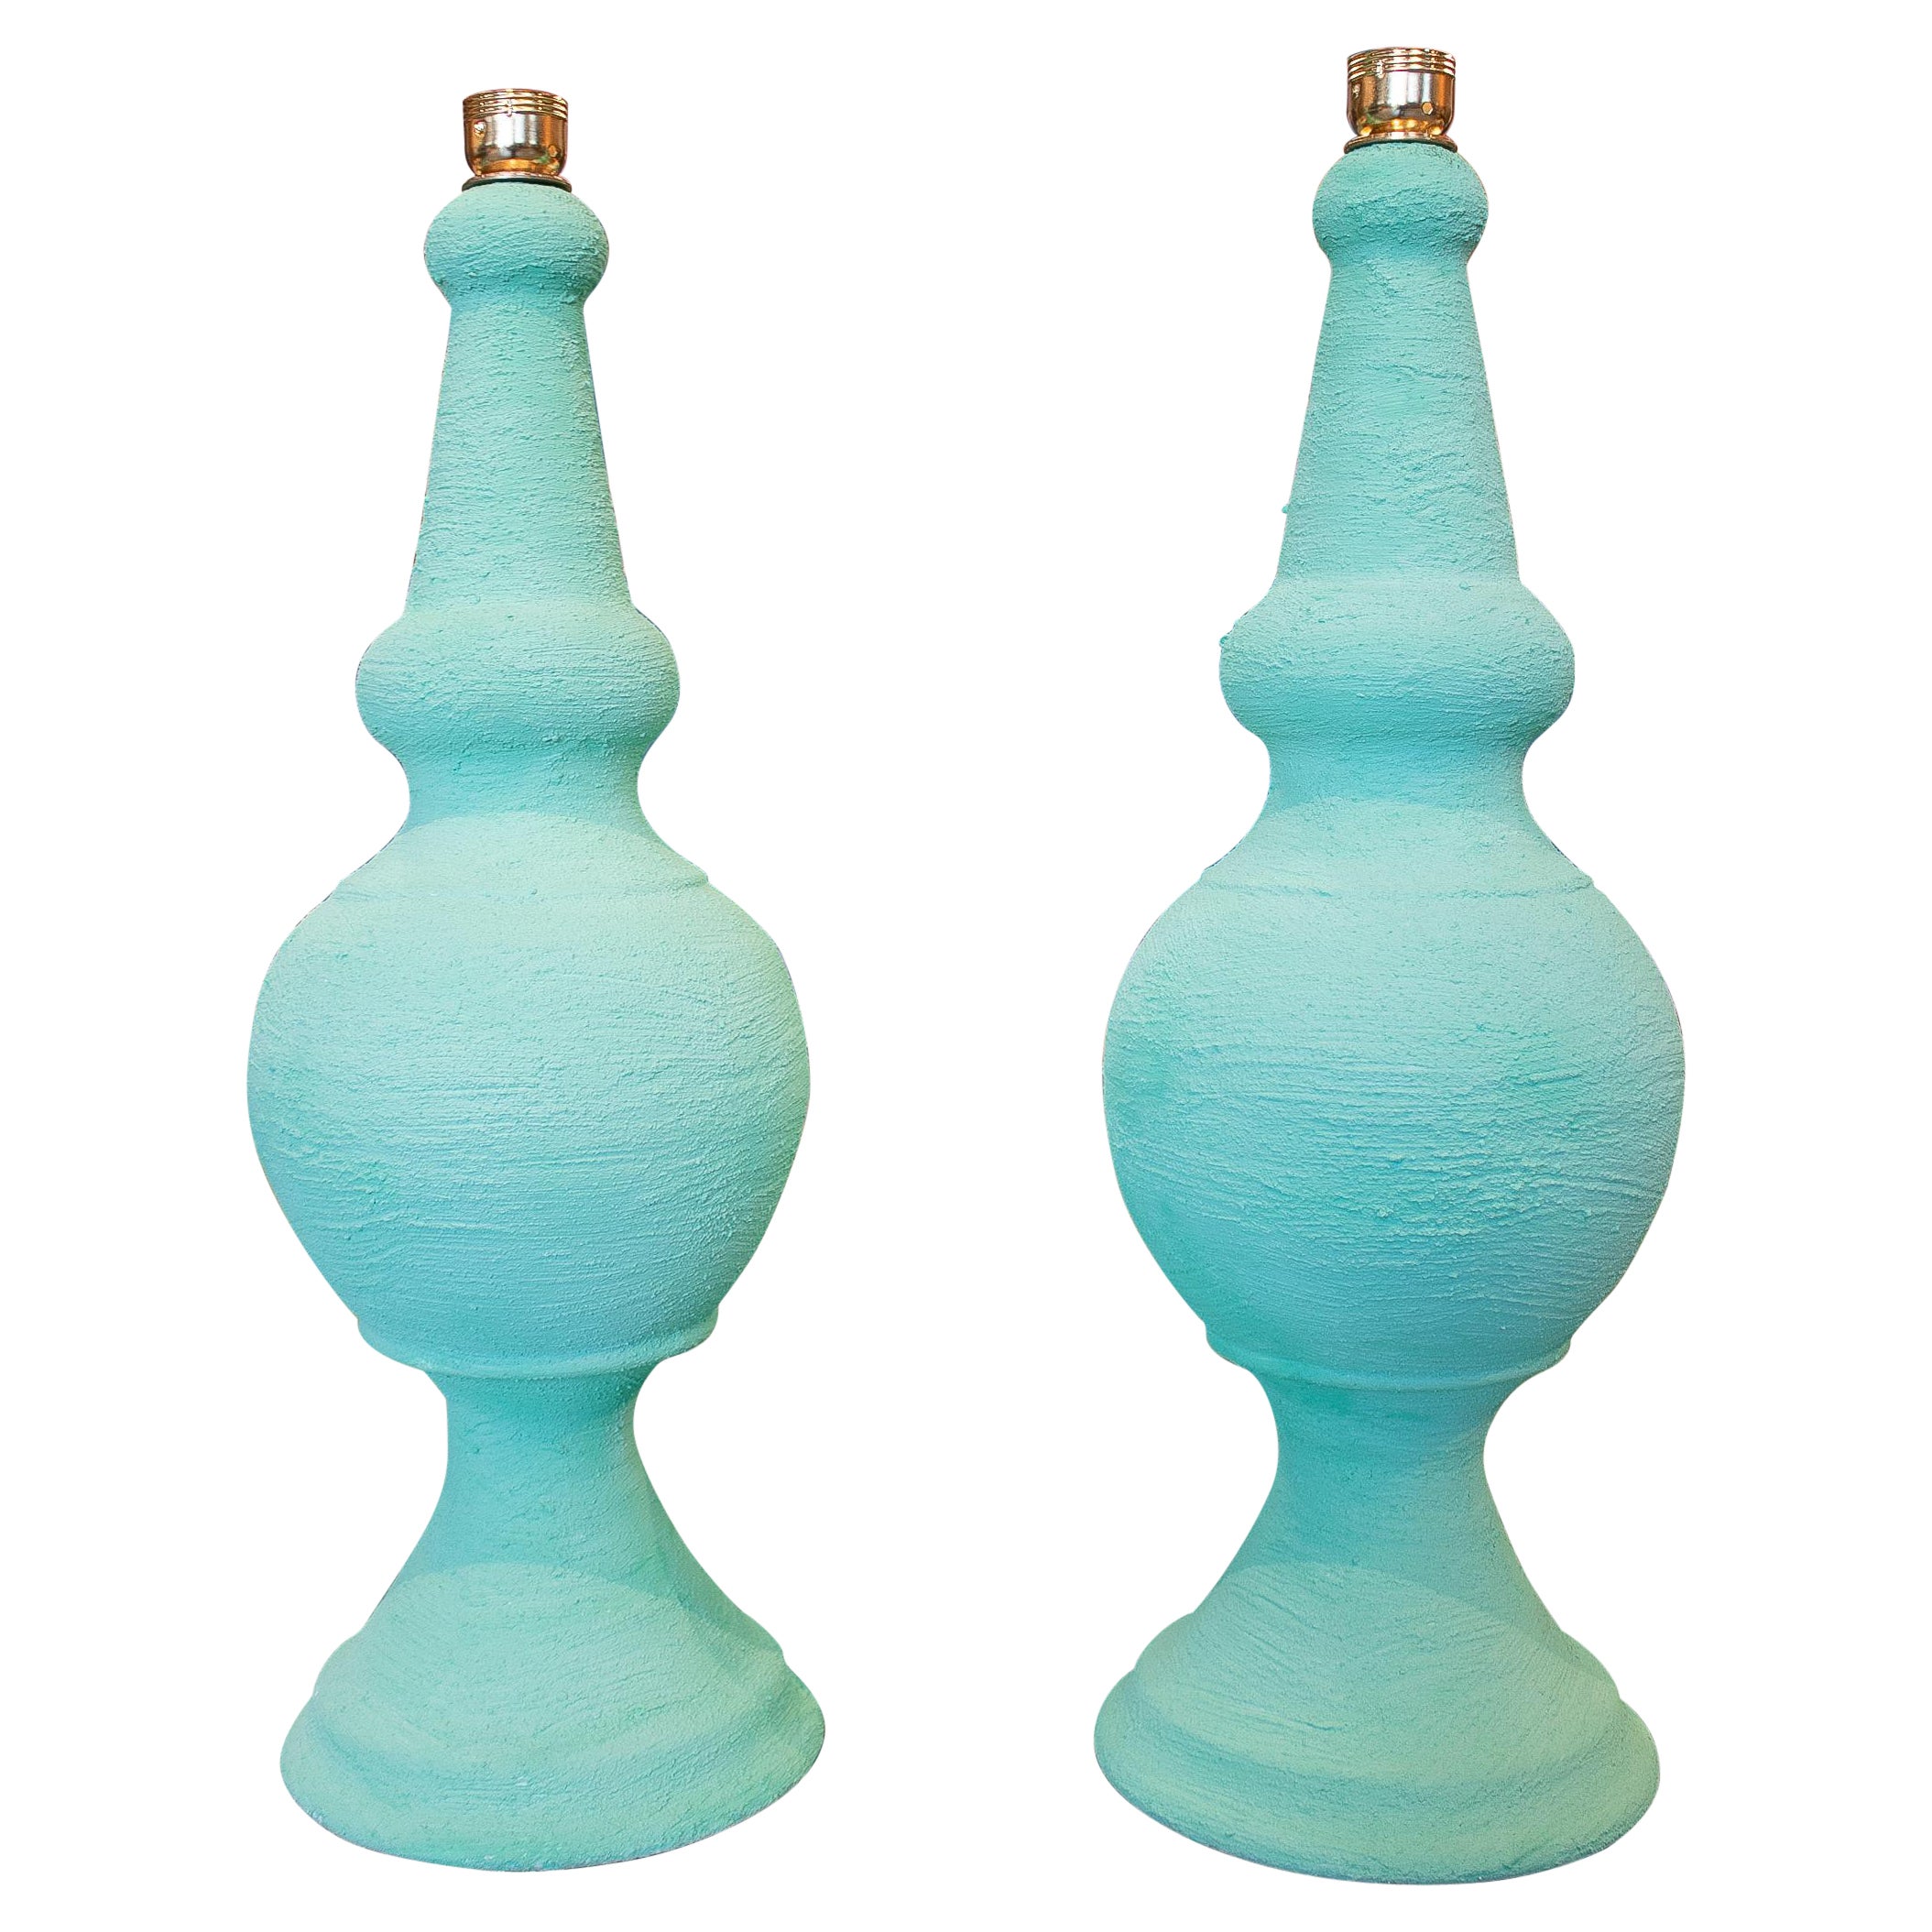 Pair of 1980s Spanish Handcrafted Green Ceramic Table Lamps